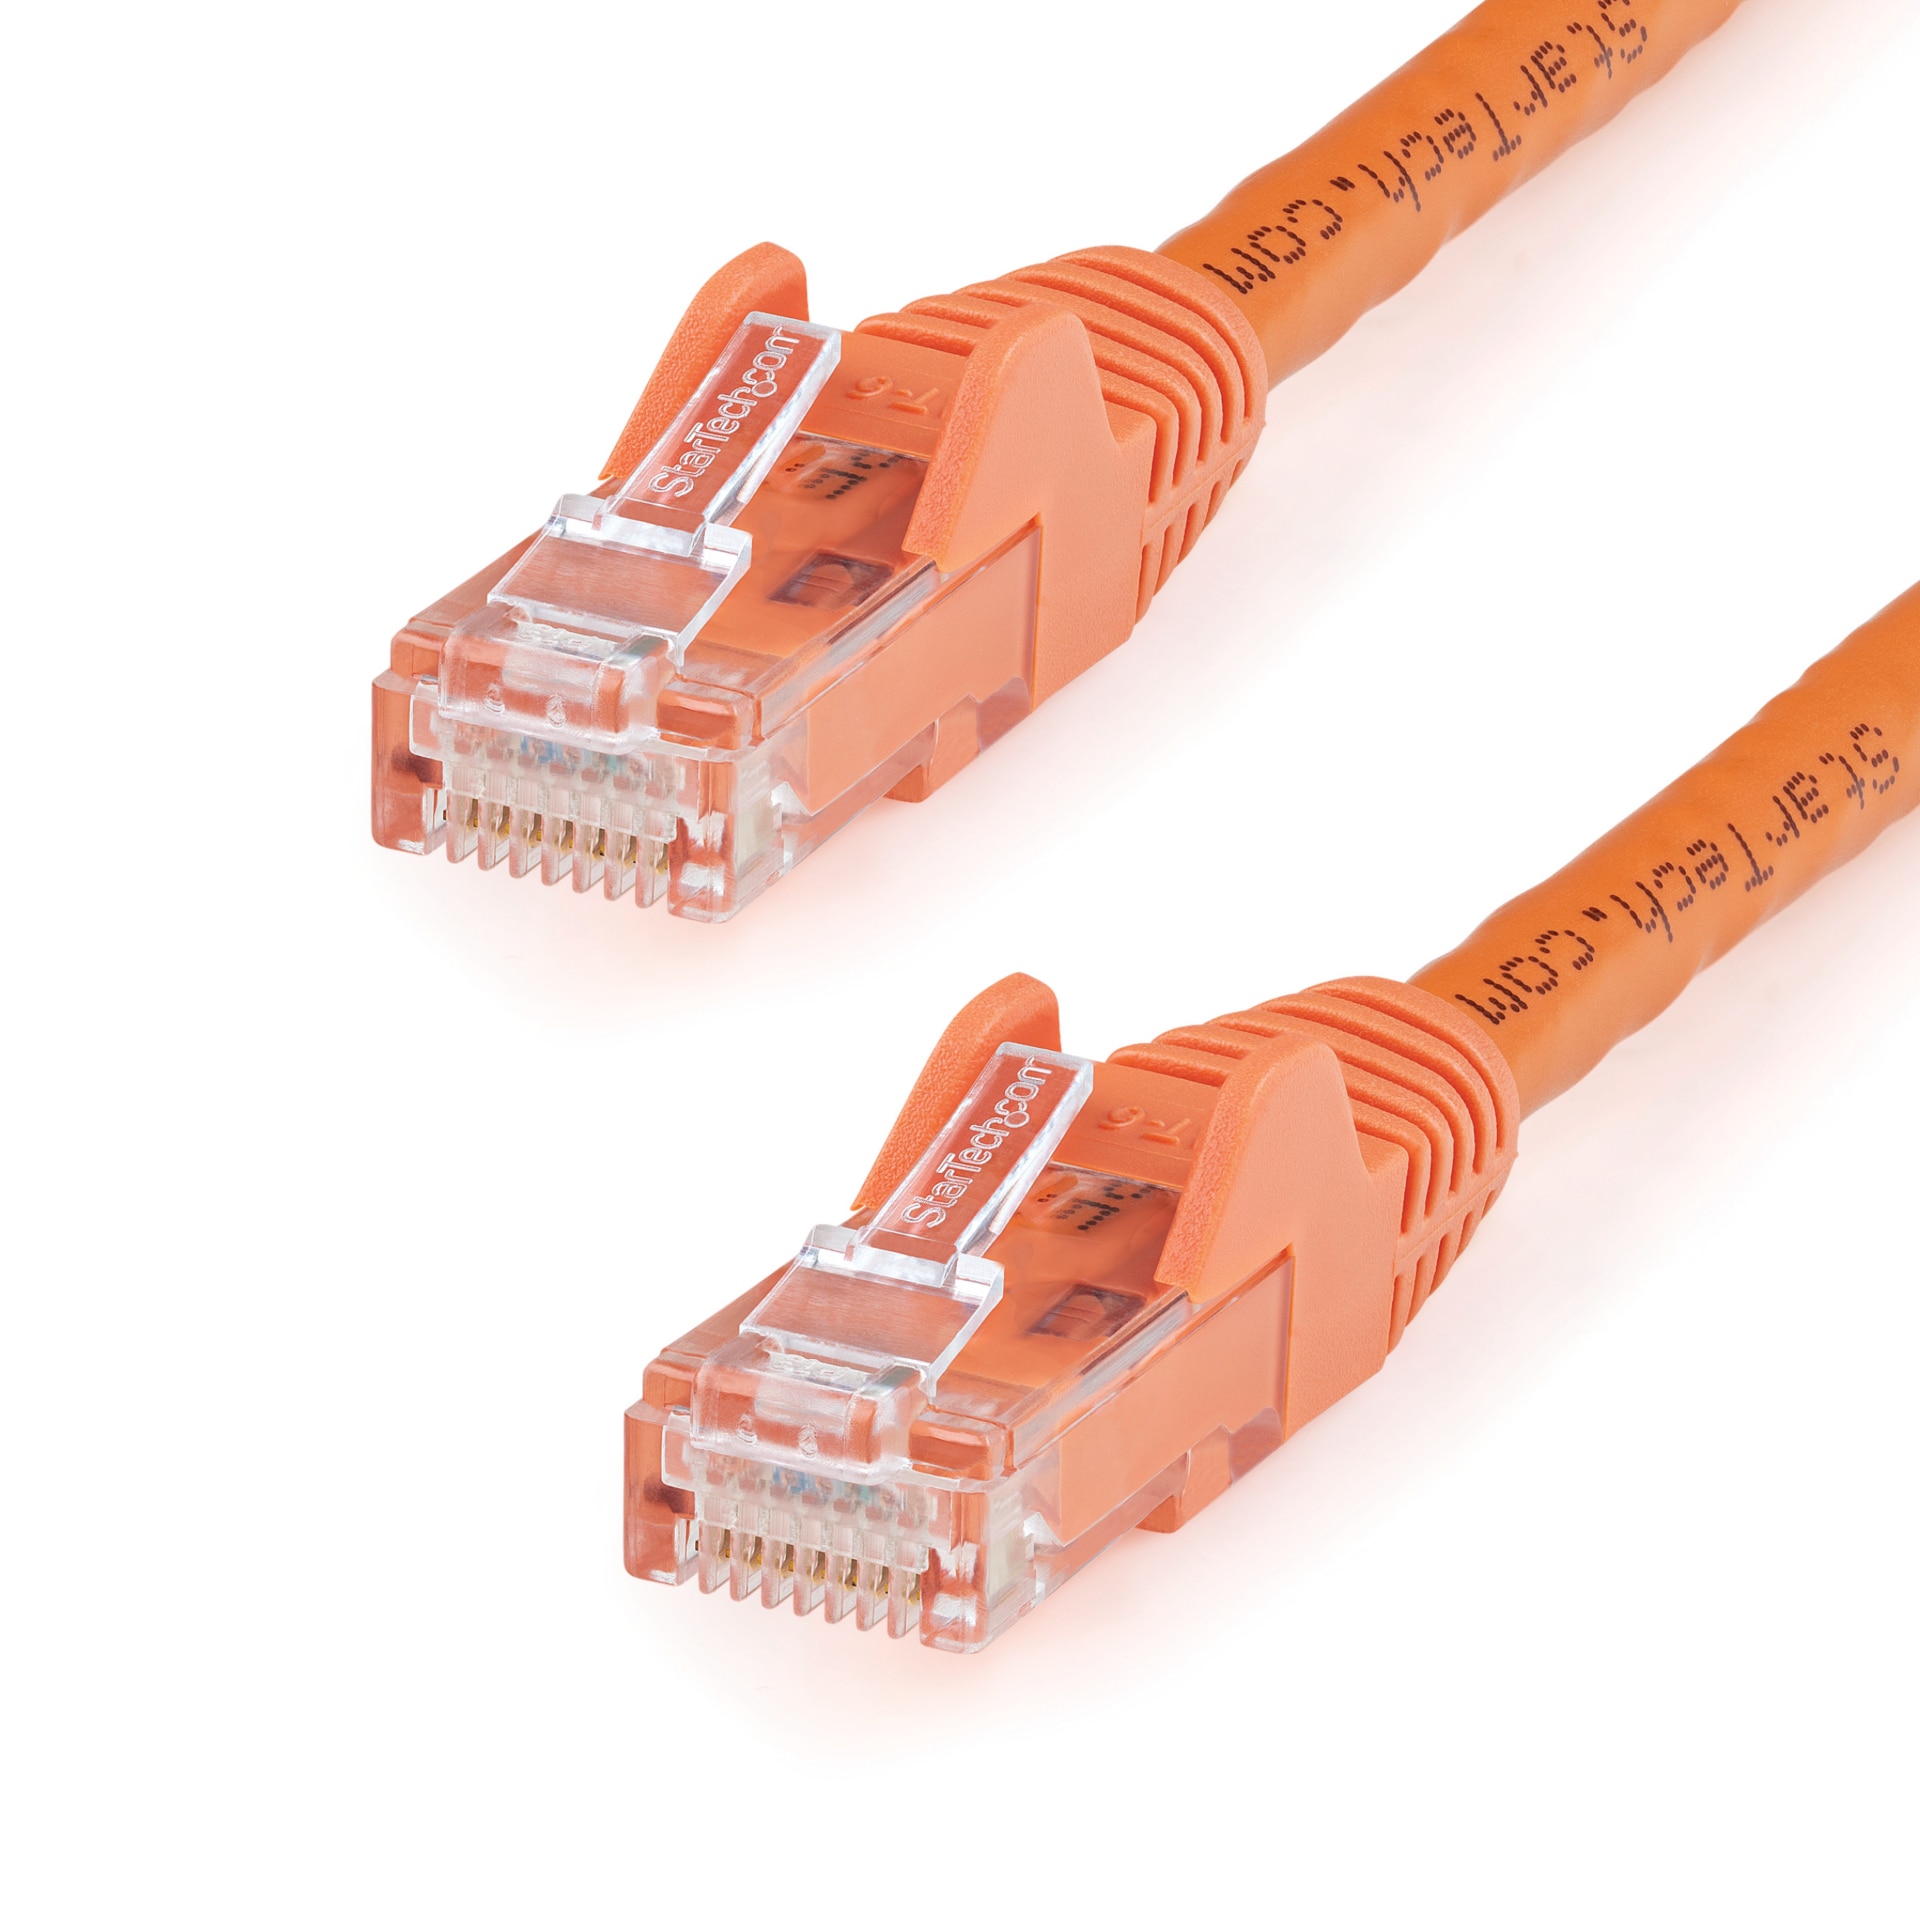 StarTech.com 6in CAT6 Ethernet Cable Orange Snagless UTP CAT 6 Gigabit Cord/Wire 100W PoE 650MHz